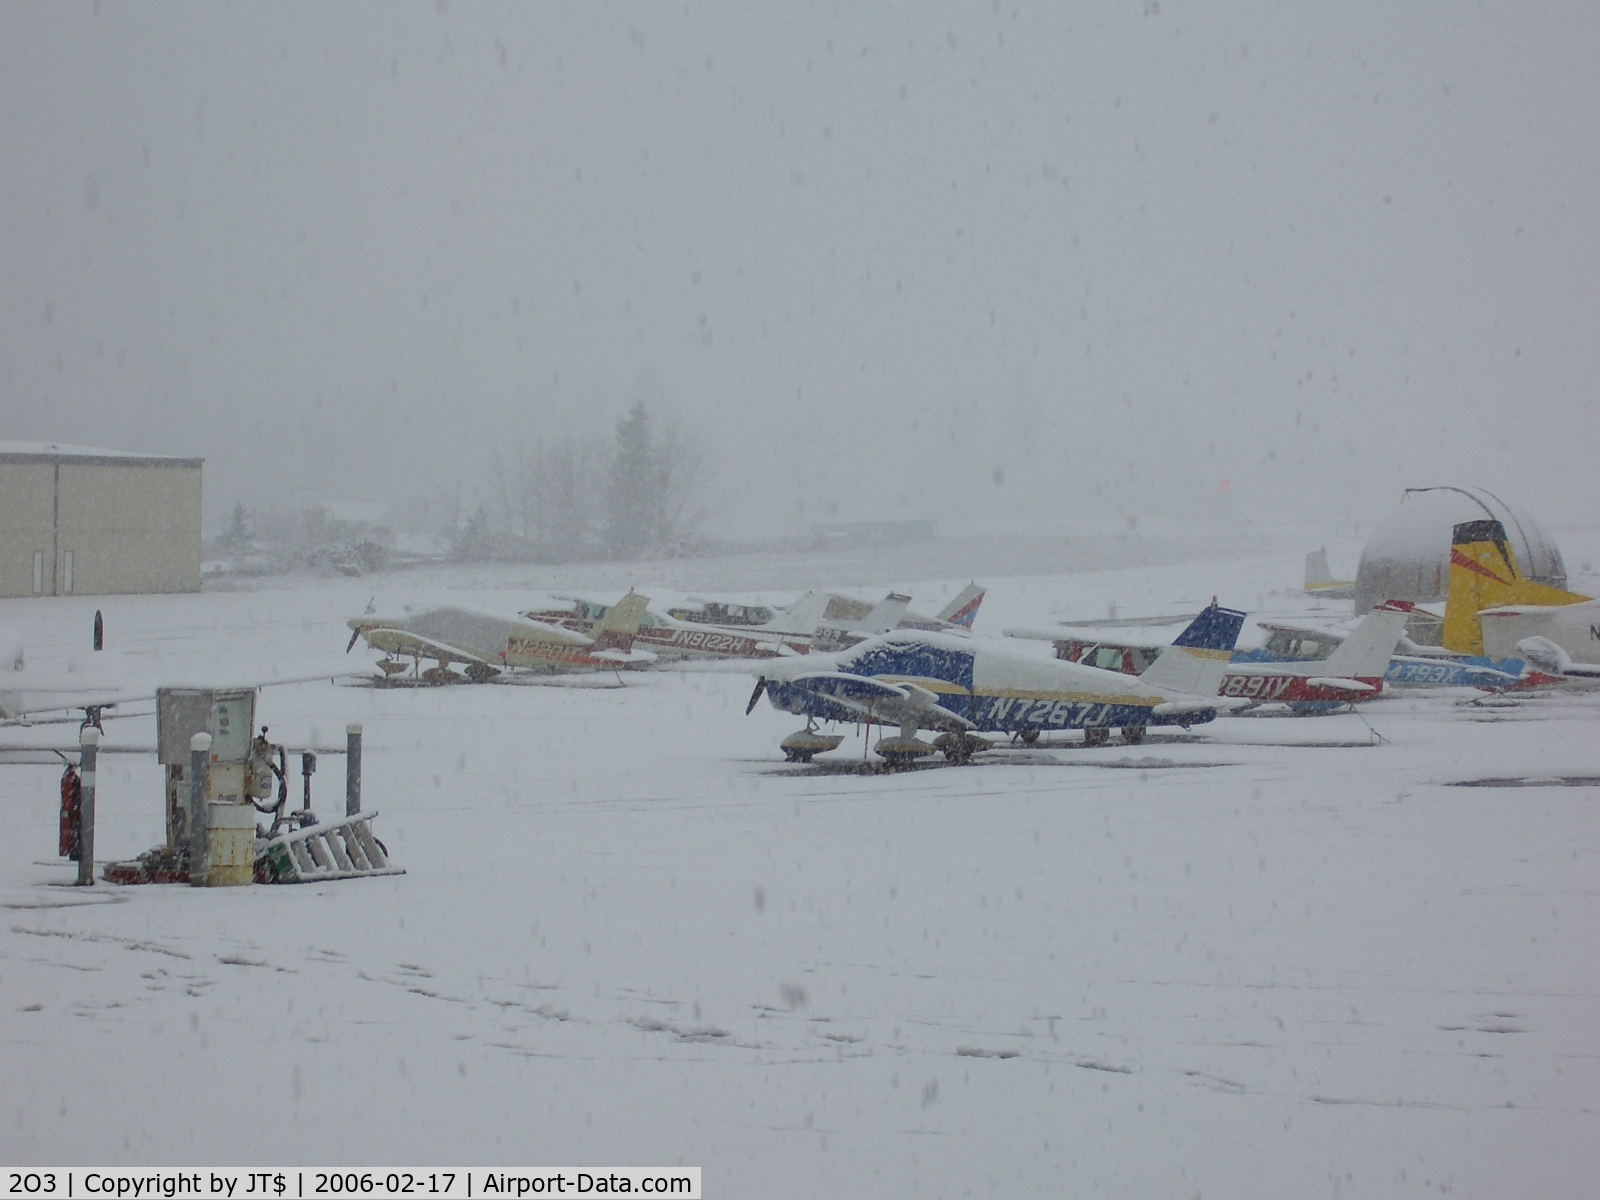 Angwin-parrett Field Airport (2O3) - Angwin Airport in the Snow